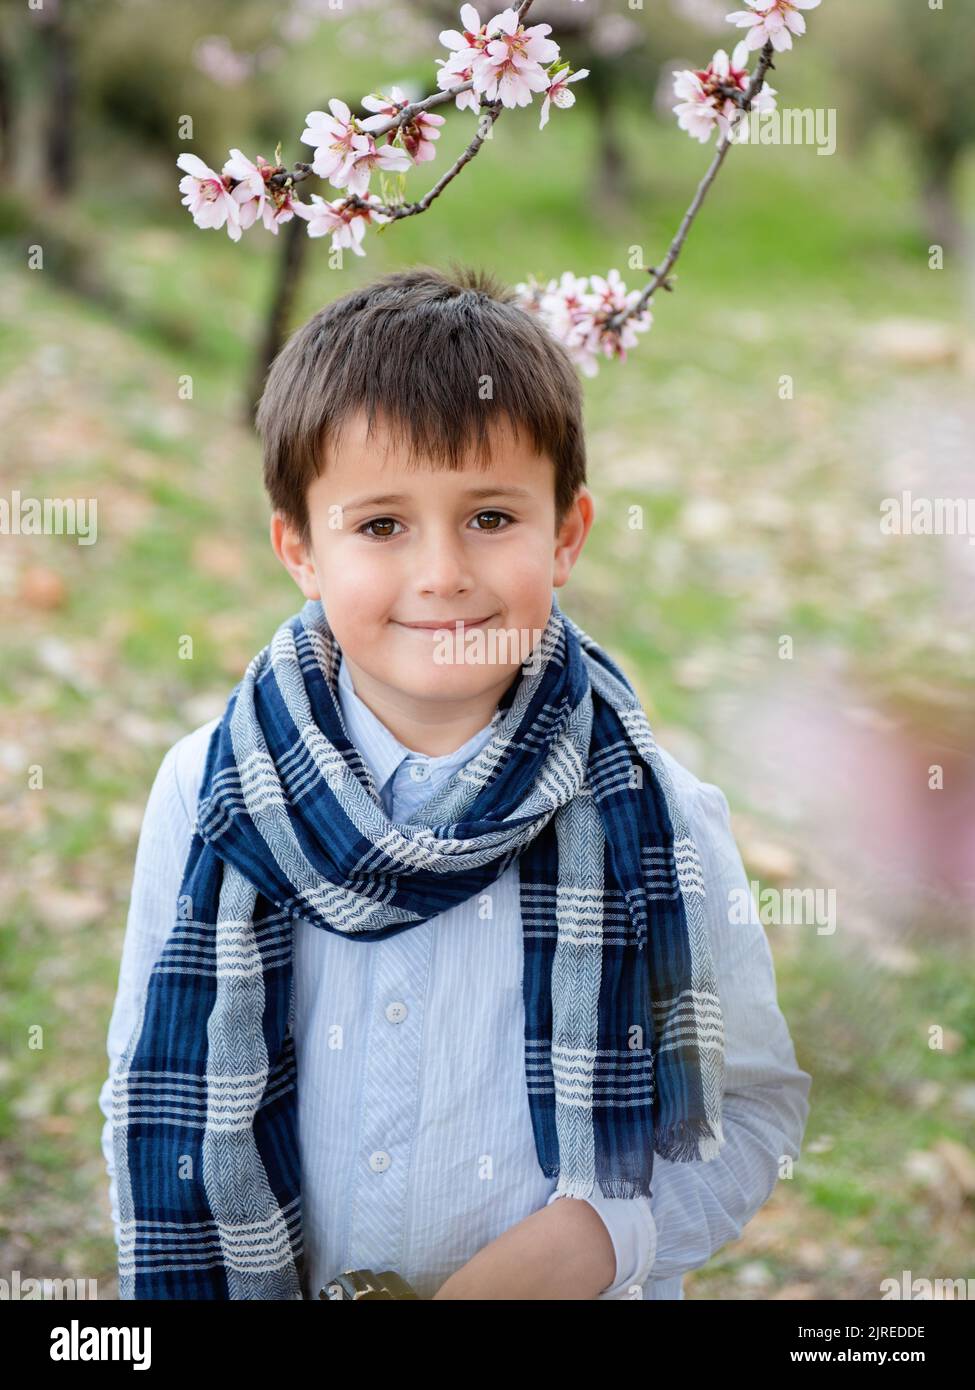 Portrait happy young boy looking at camera with smiling face Stock Photo